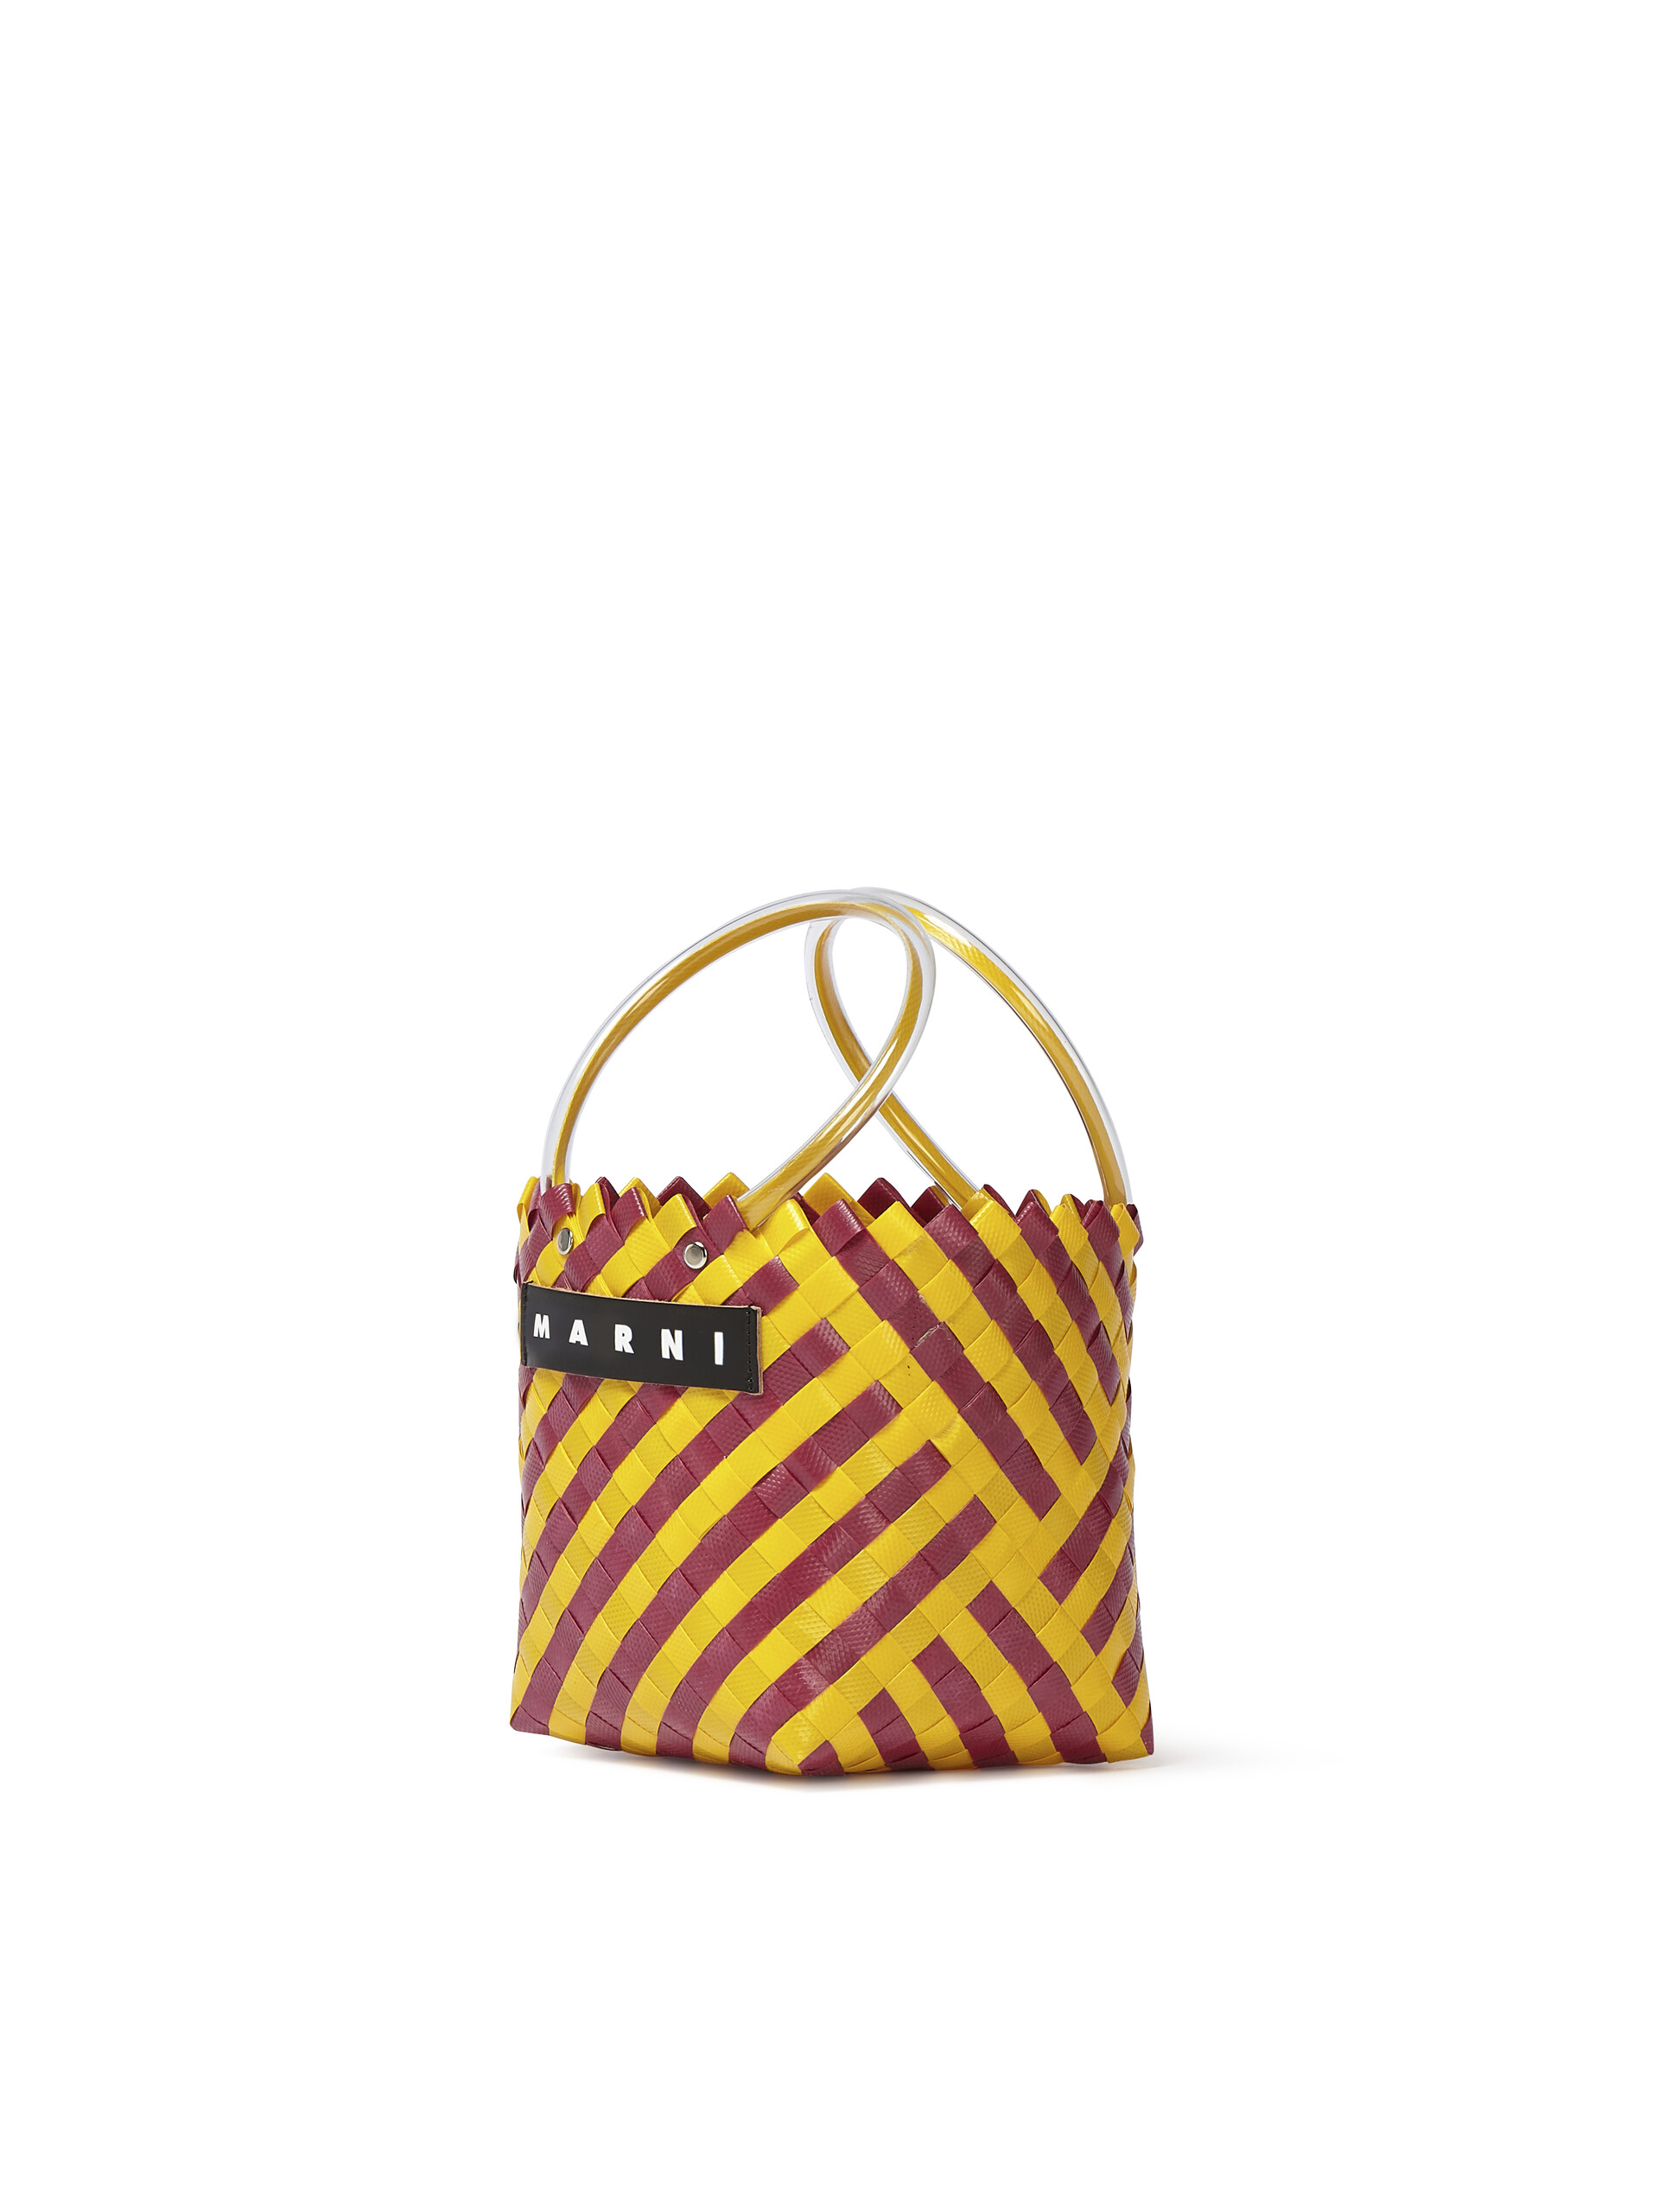 MARNI MARKET TAHA bag in yellow and burgundy woven material - Shopping Bags - Image 2